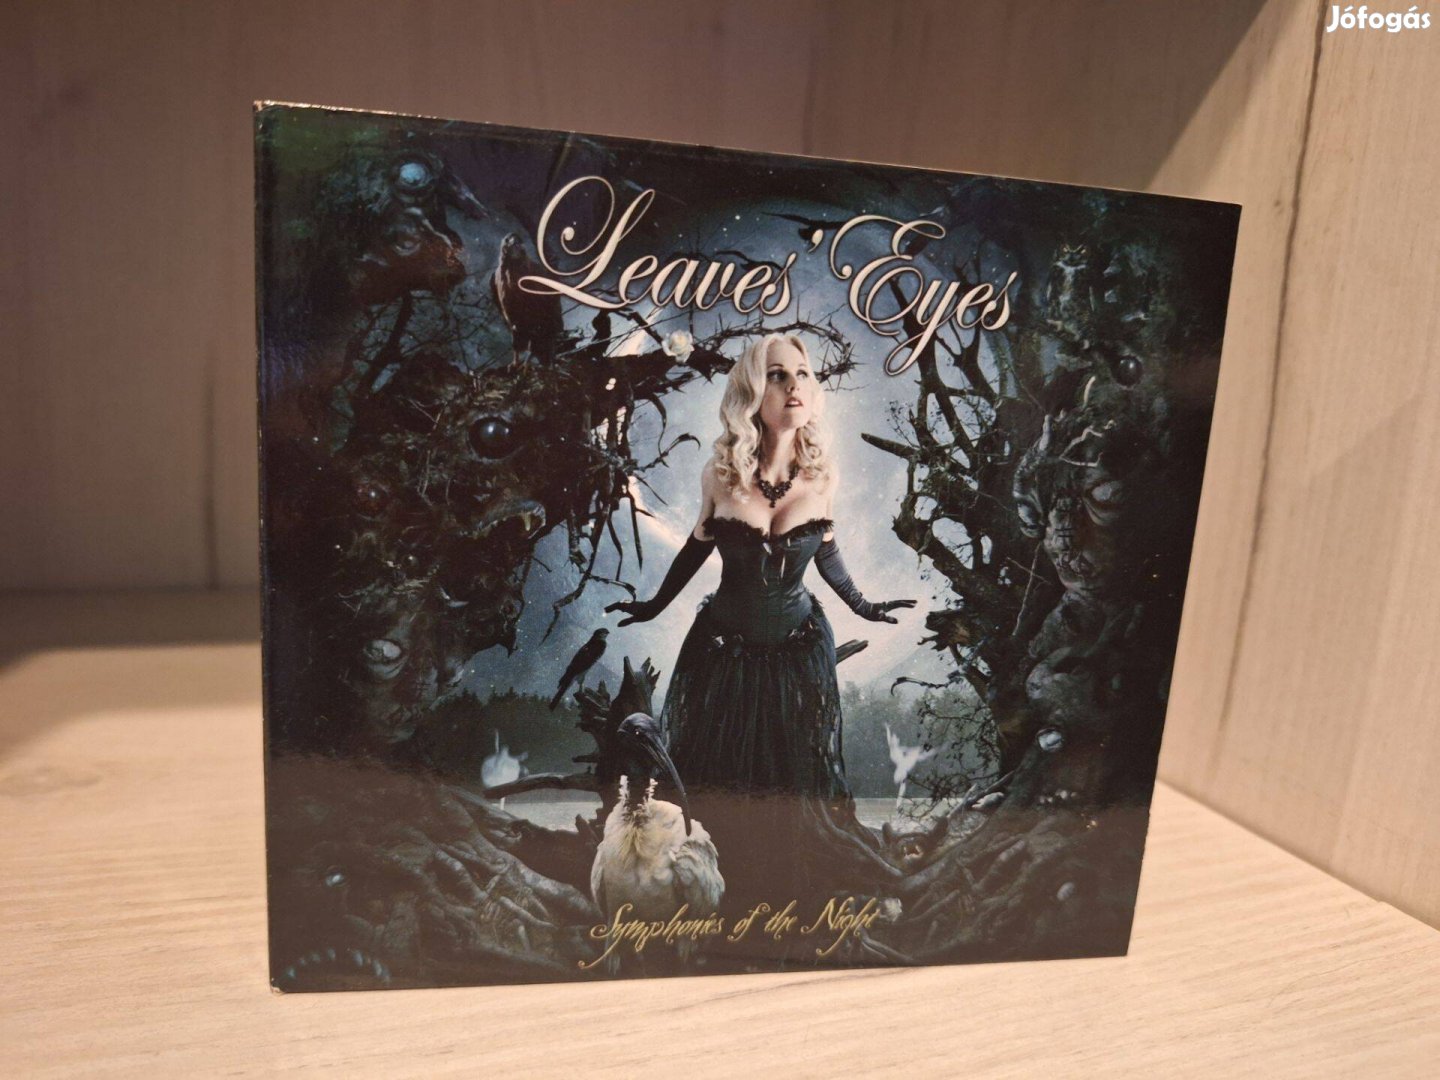 Leaves' Eyes - Symphonies Of The Night CD Limited Edition, Digipak